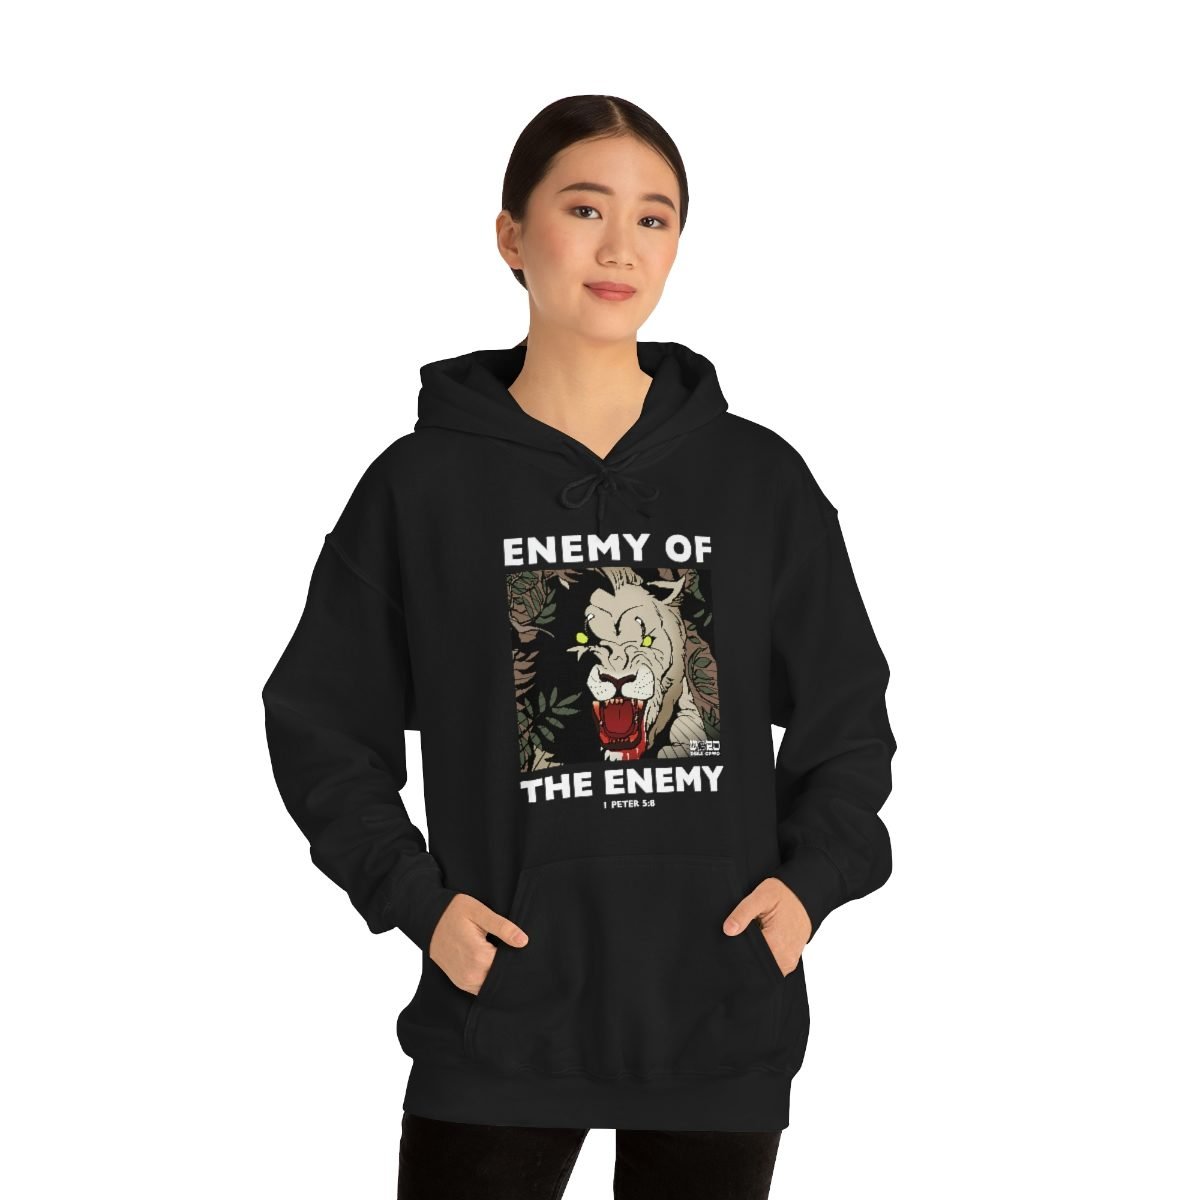 Word For Word Bible Comics – Enemy of the Enemy Pullover Hooded Sweatshirt